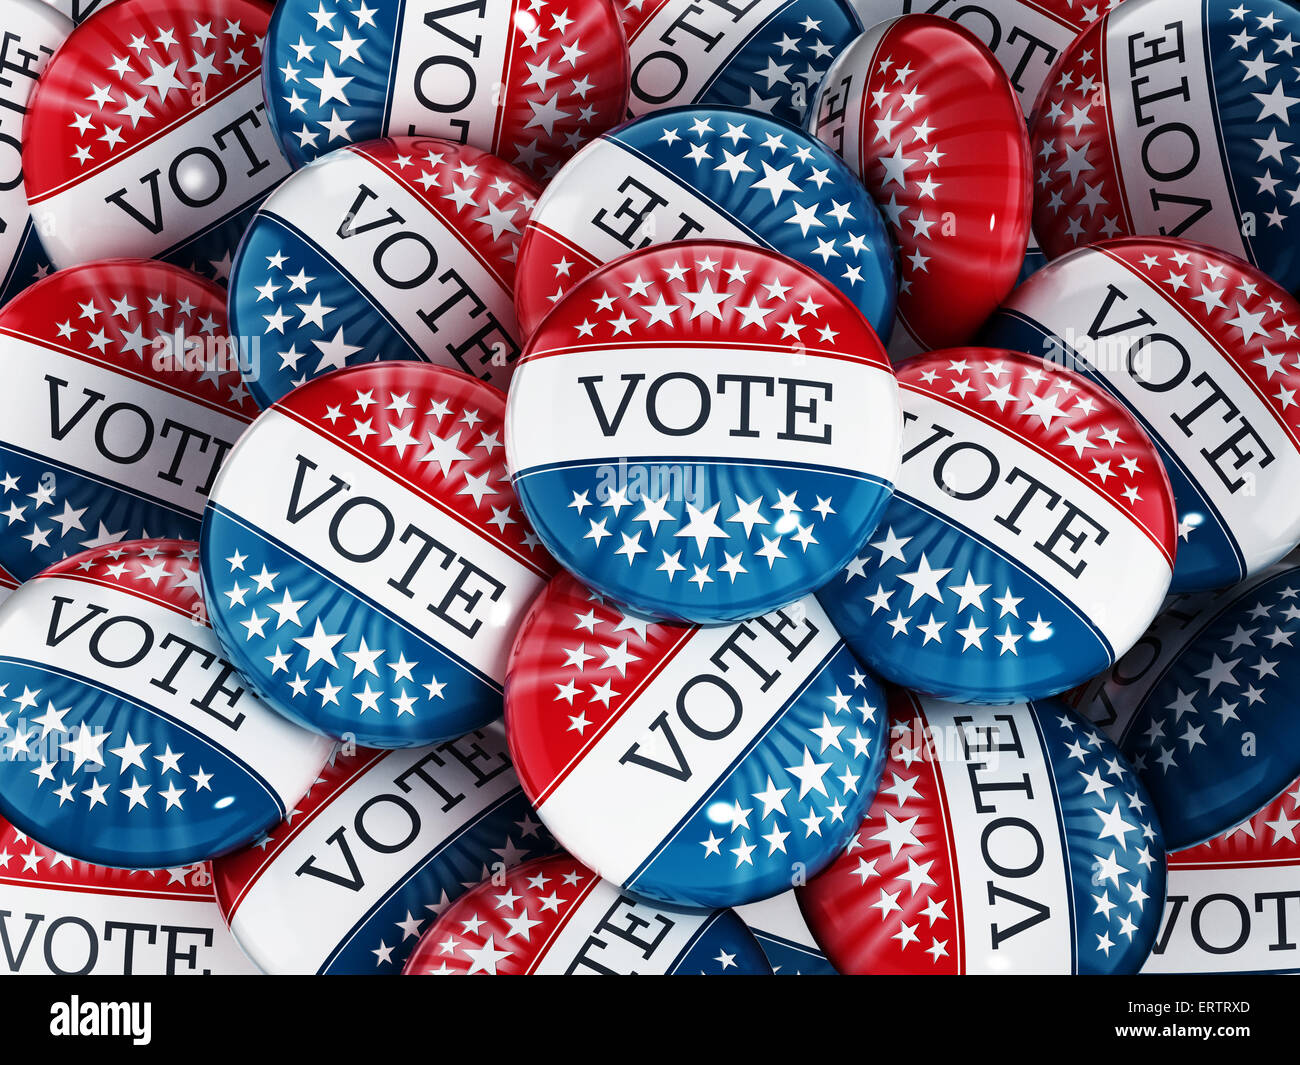 Vote buttons stack with red and blue colors Stock Photo